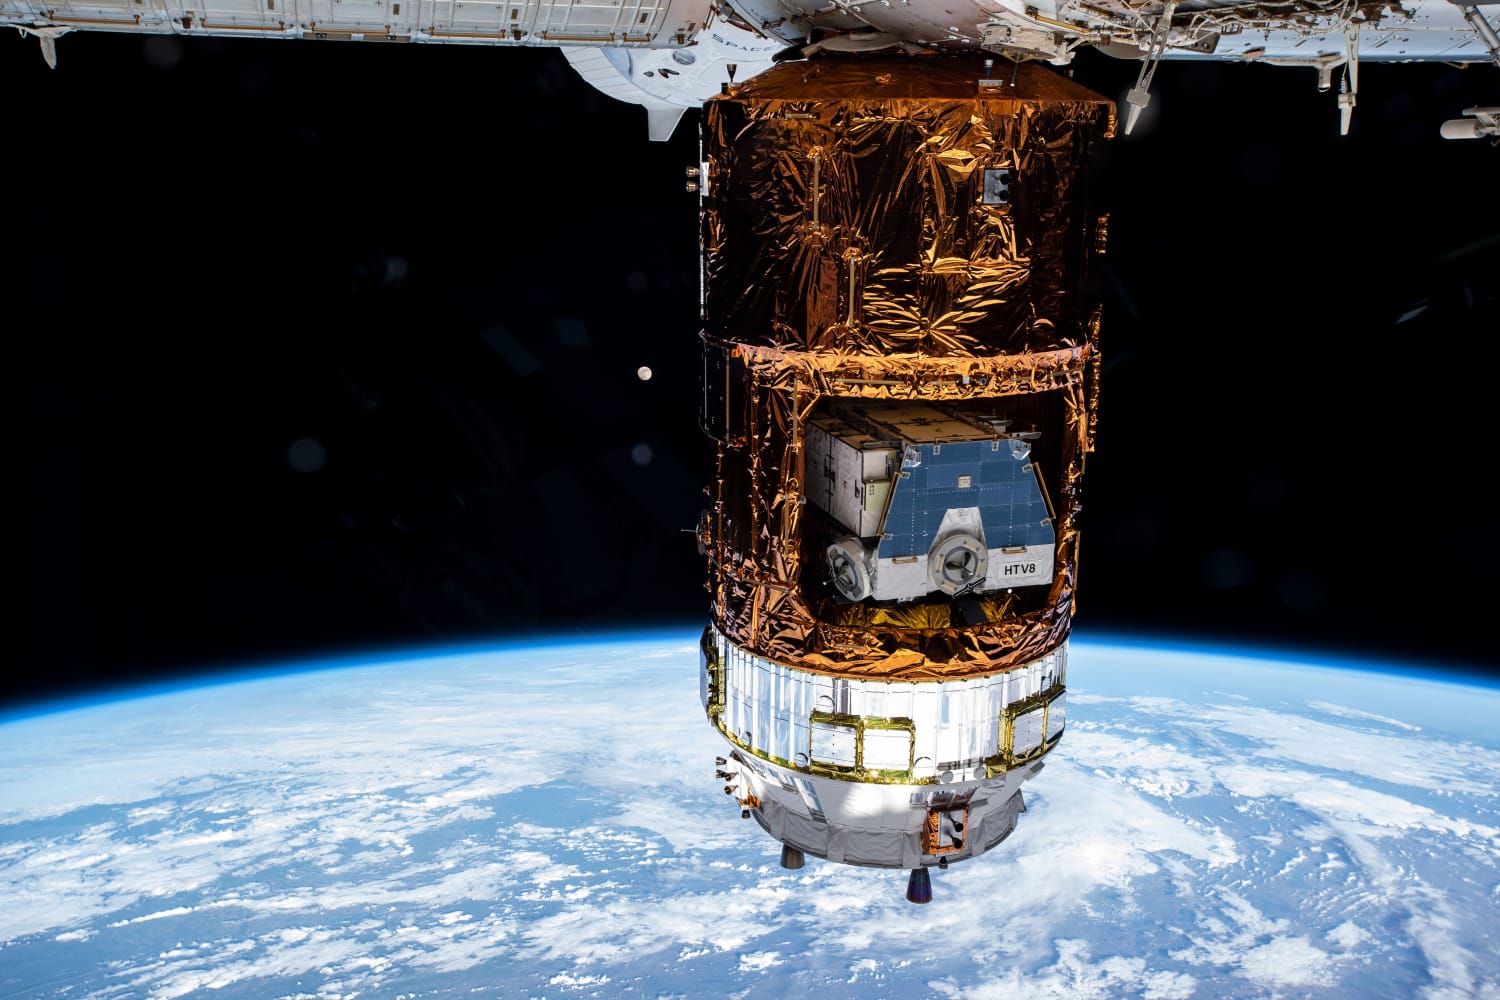 Japan's HTV-9 Cargo Craft Helps Supply the Space Station